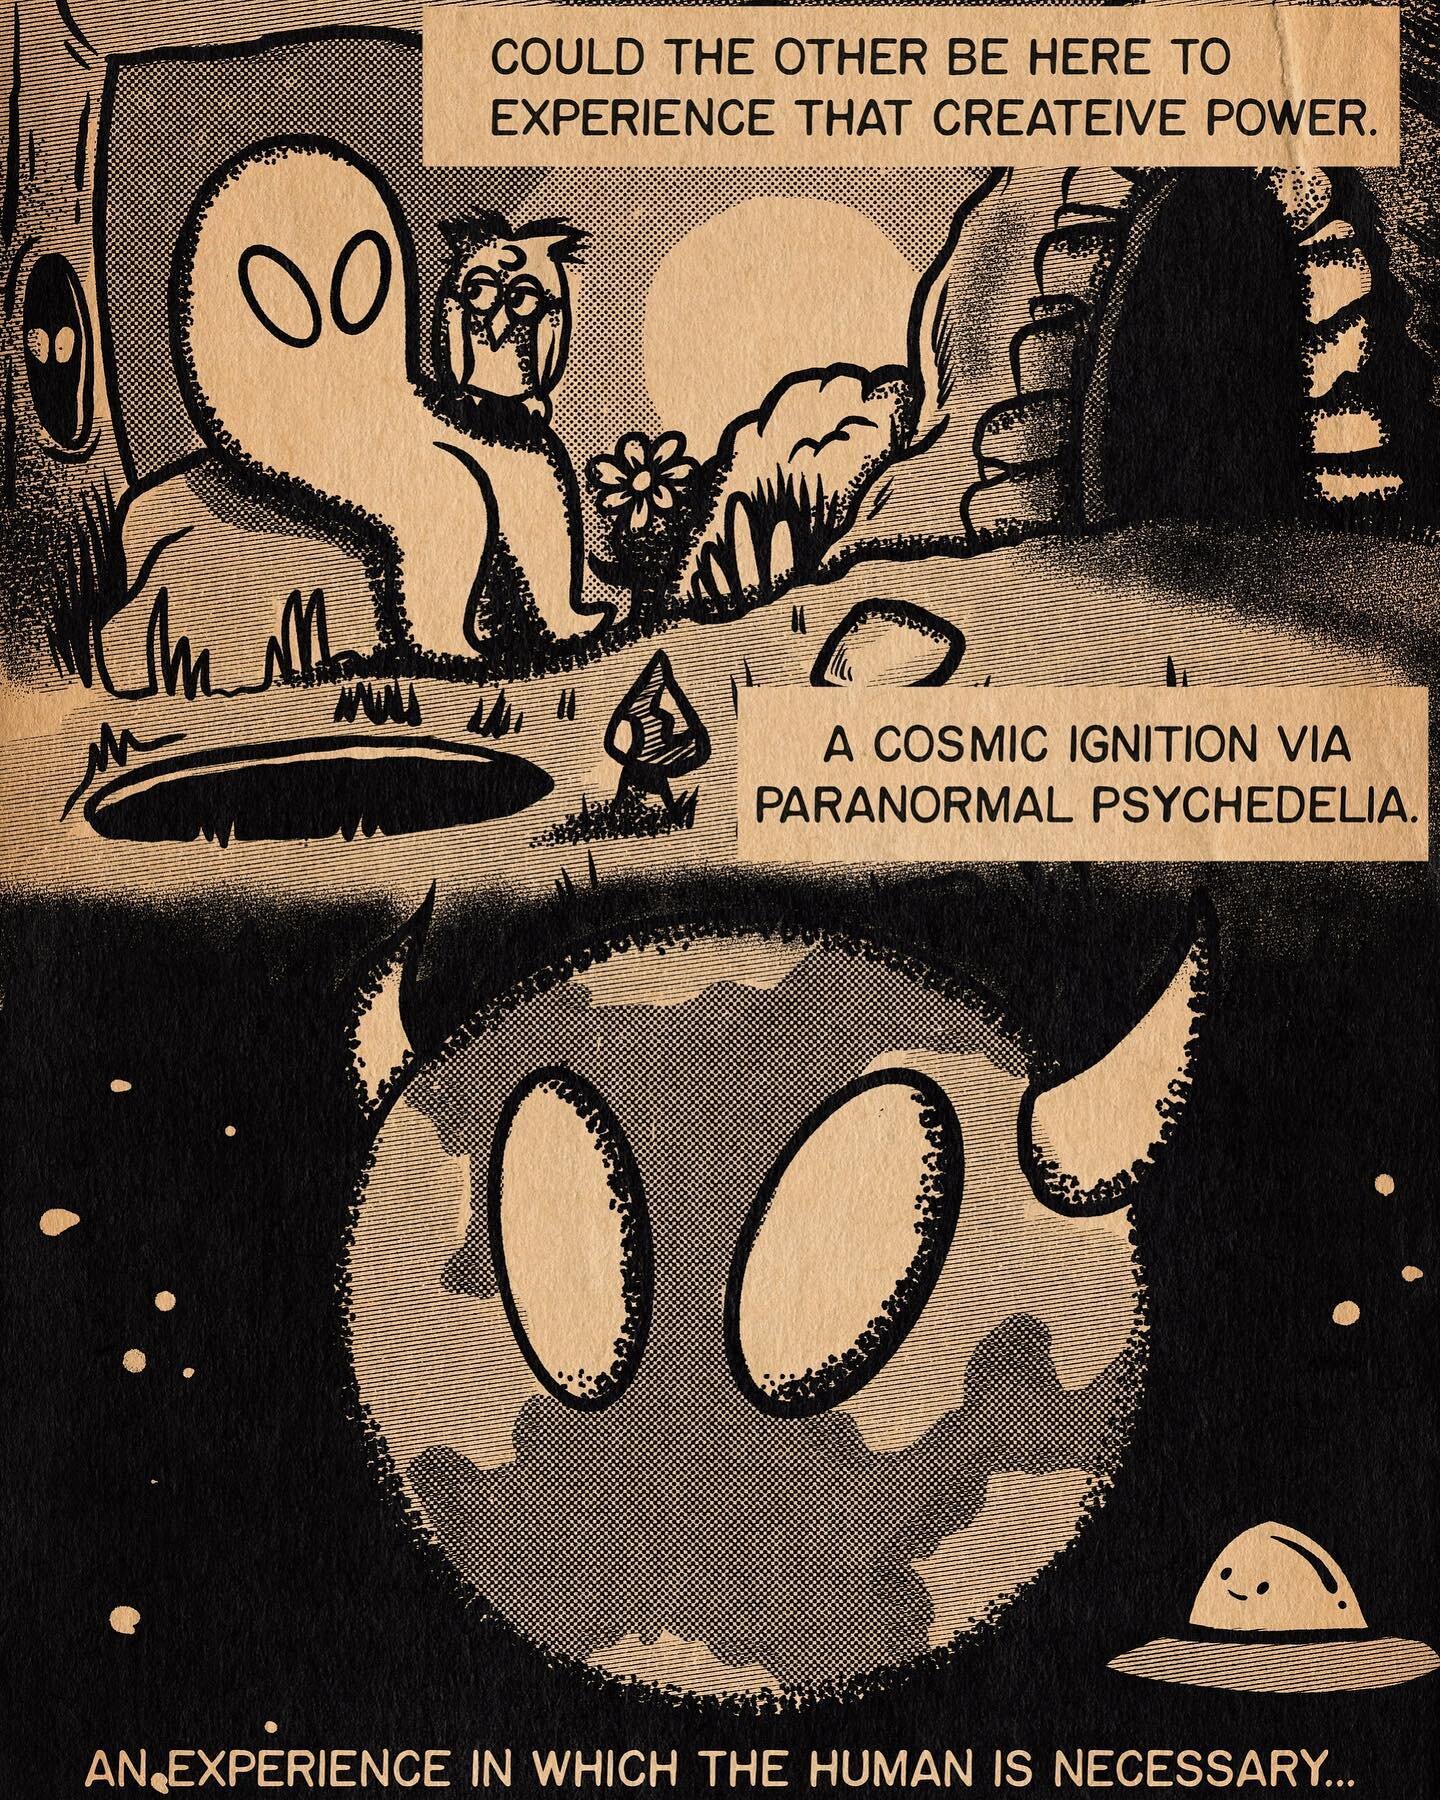 Cosmic ignition 💫

Little weirdo Wednesday comic for your morning enjoyment. Hope the weirdest day of the week finds you well! 👻

#weirdo #comics #cosmic #ignition #drawingoftheday #cartoon #paranormal #ufo #weirdoart